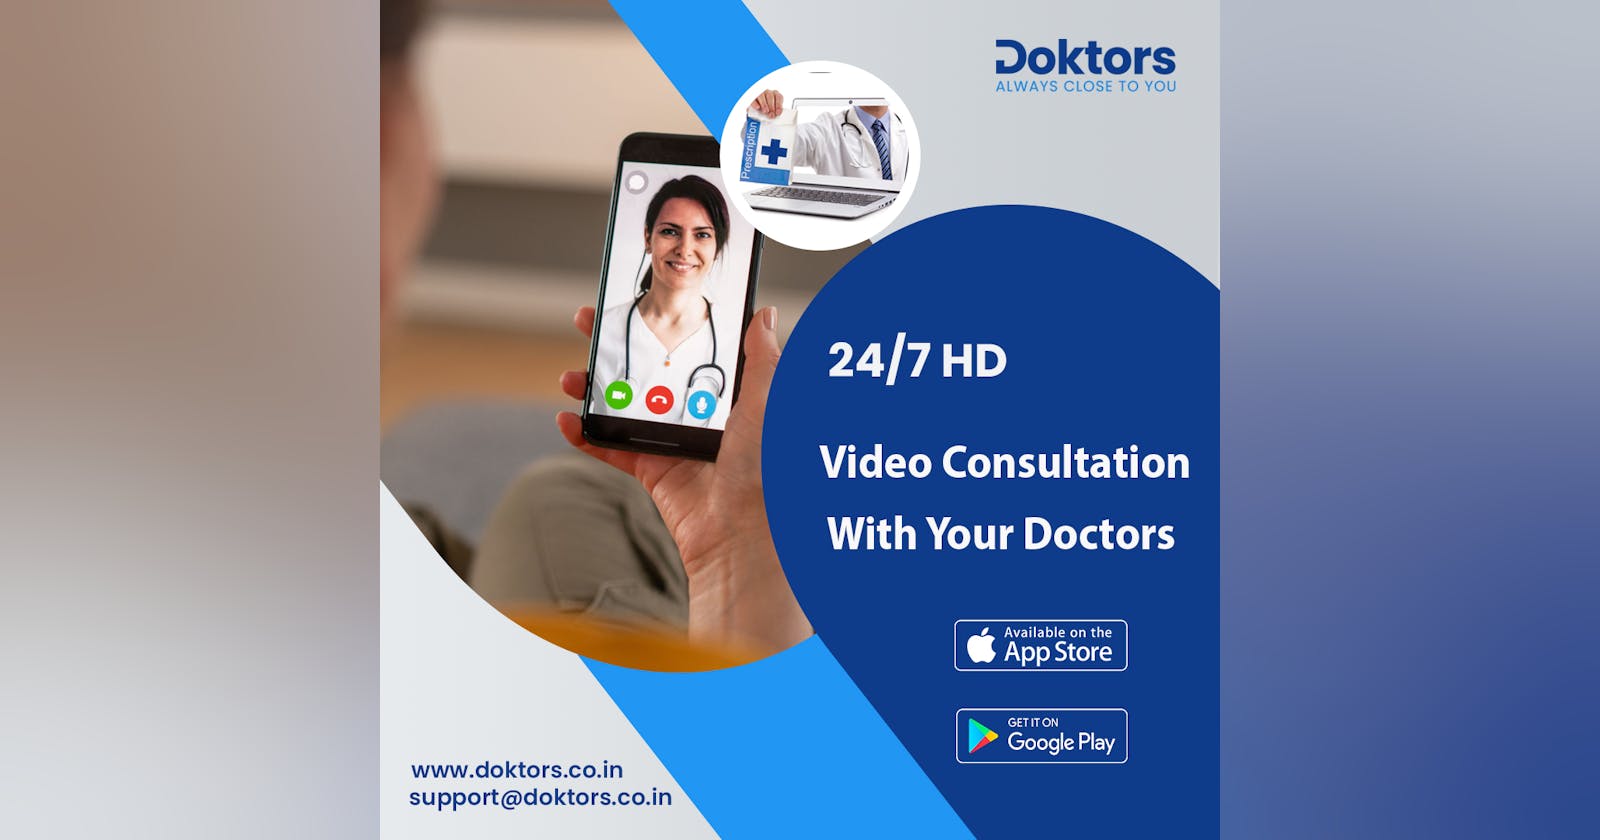 24/7 HD Video Consultation With Your Doctors